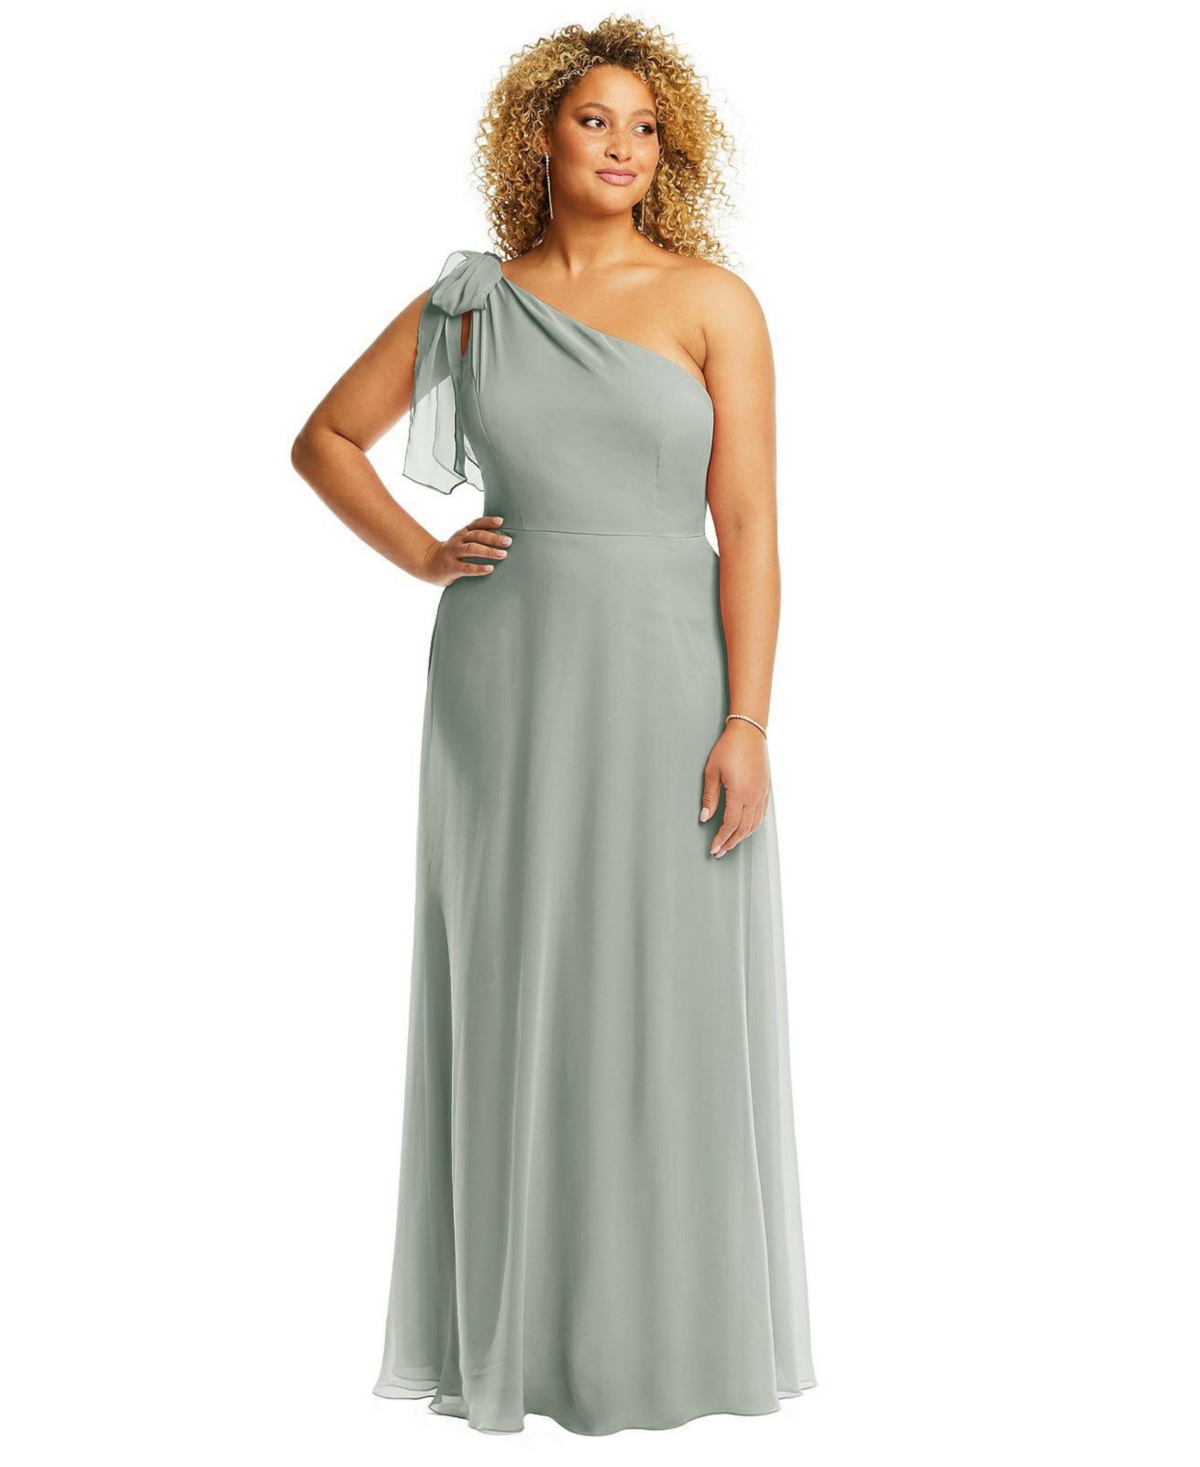 Women's Plus Size Draped One-Shoulder Maxi Dress with Scarf Bow - Willow green